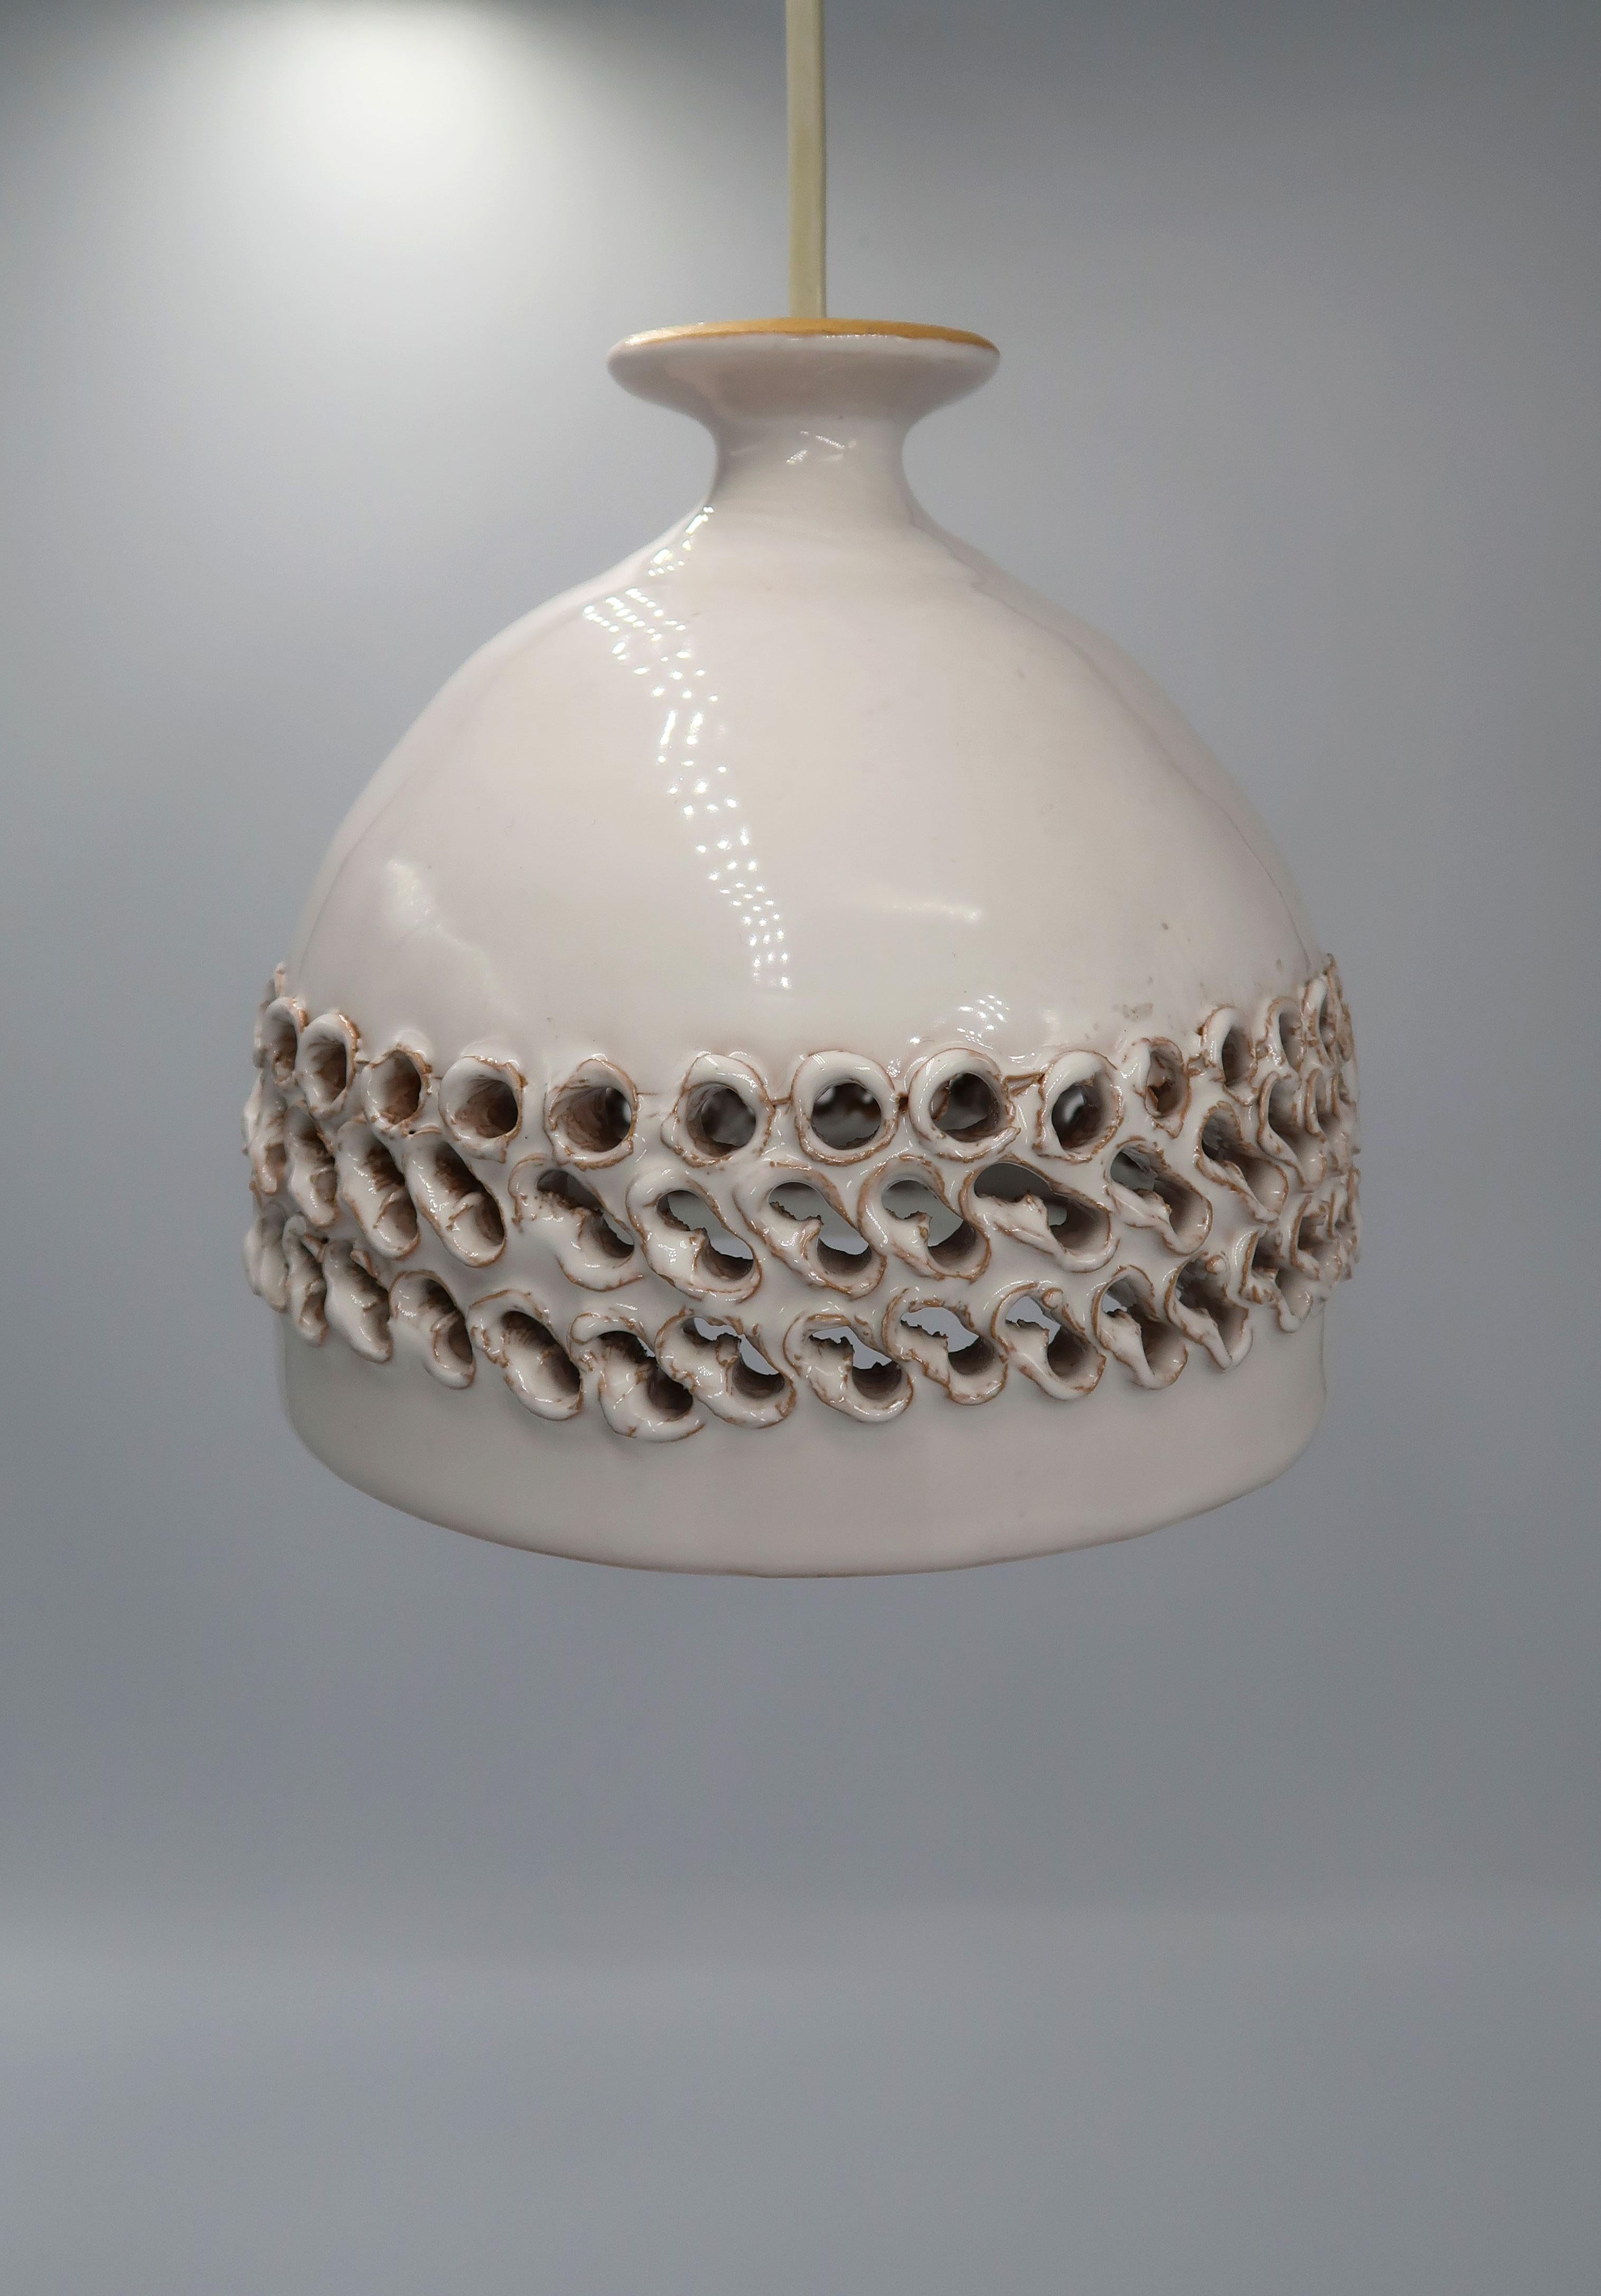 Beautiful Danish Mid-Century Modern handmade ceramic cream white glazed pendant. Three bands of handmade irregular perforated pattern around the belly of the pendant to let out light. Warm cream white shiny glazing on the exterior. Estimated